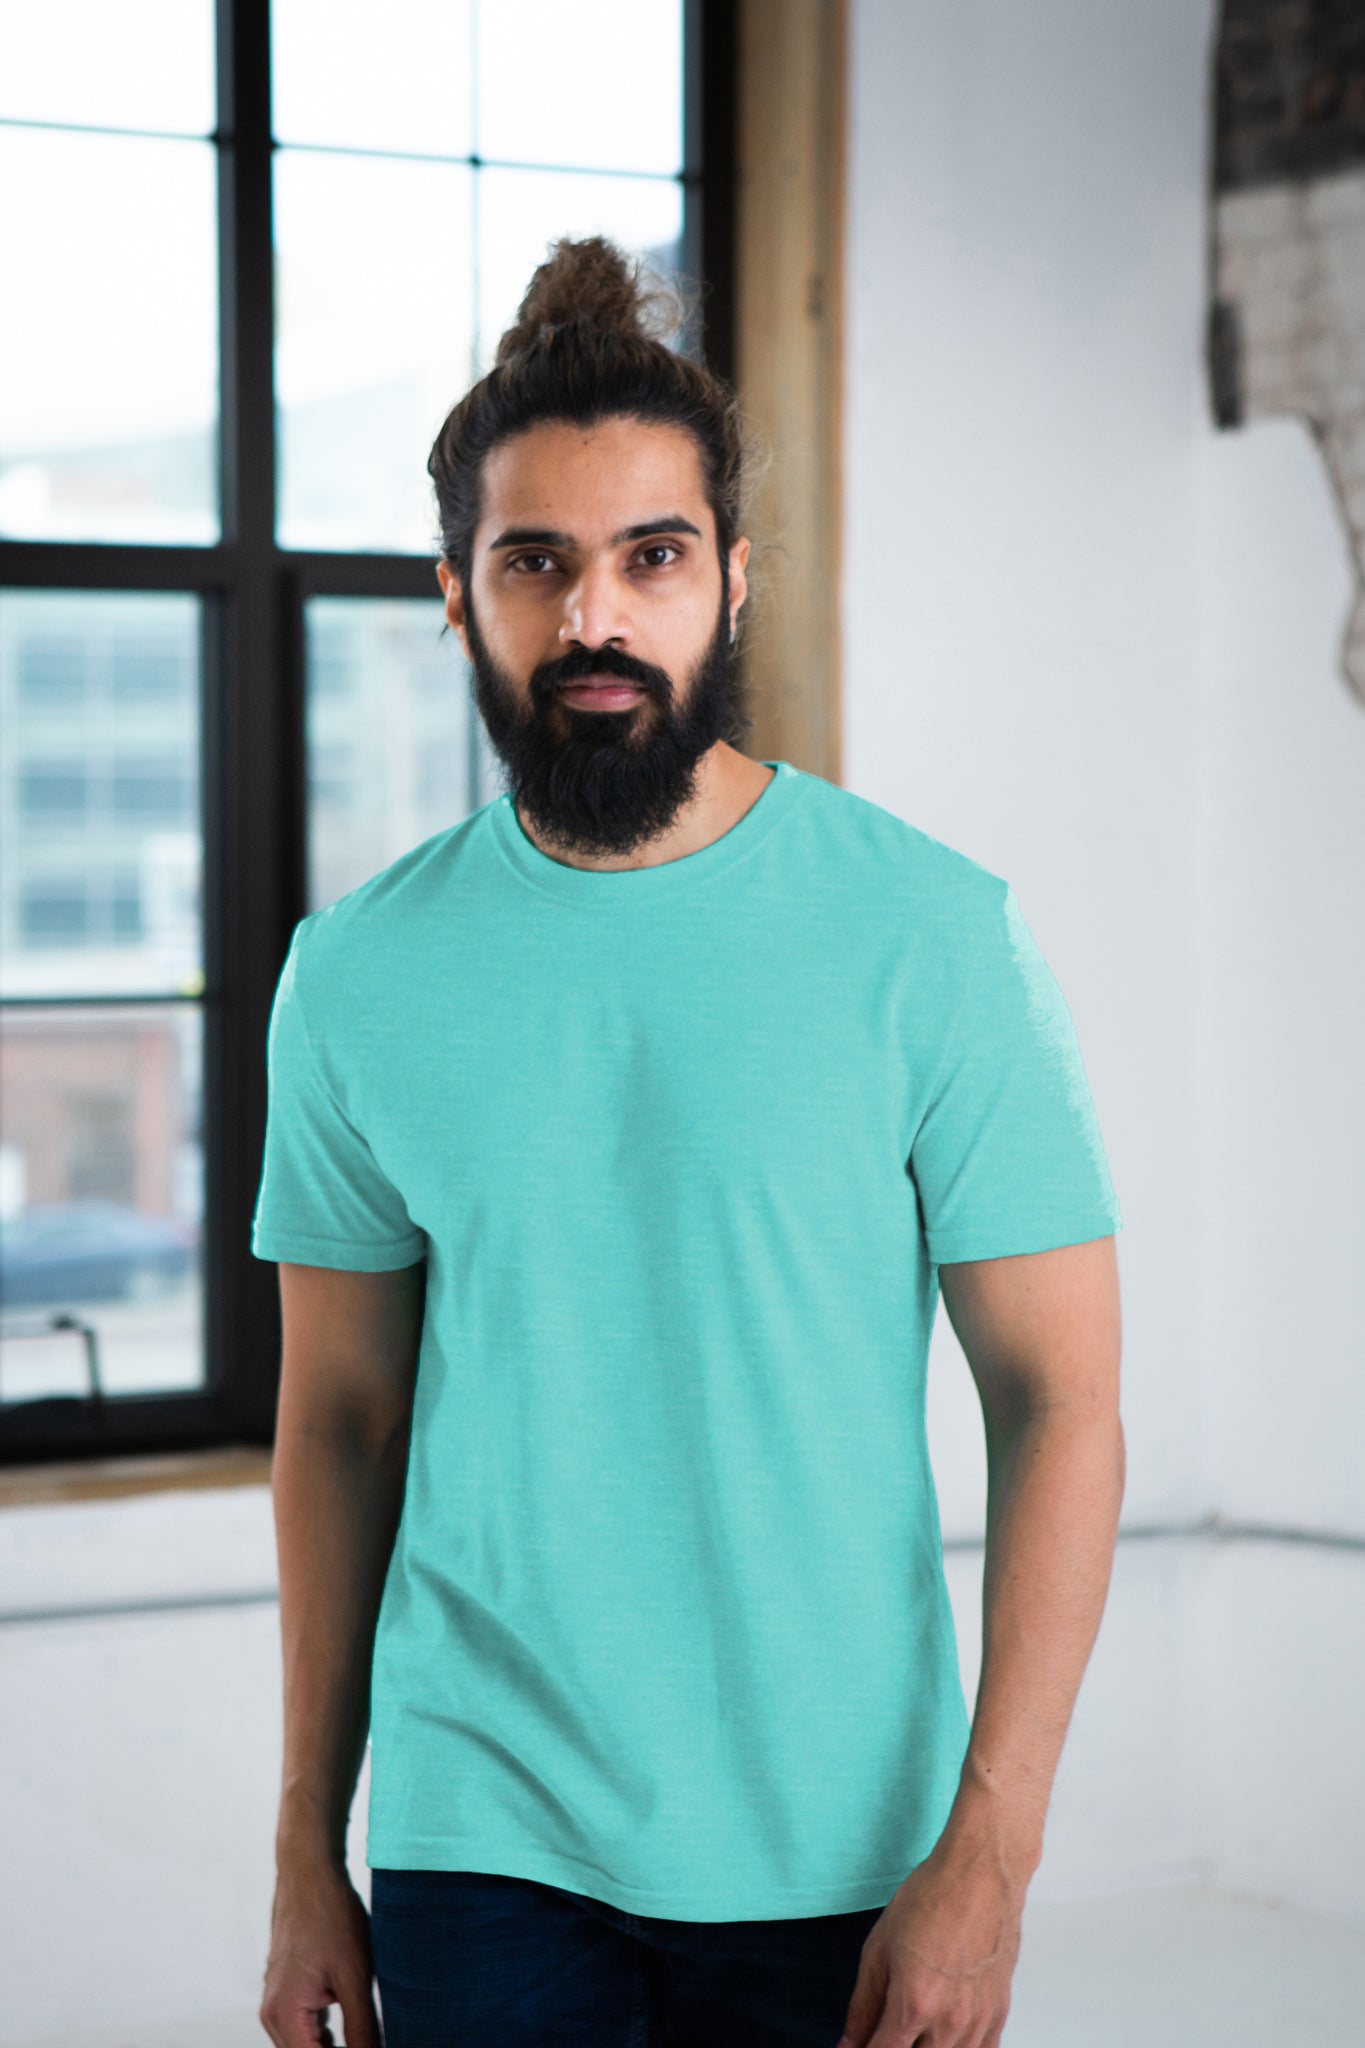 Male Model wearing GOEX Eco Triblend Unisex and Men's Tee in Teal